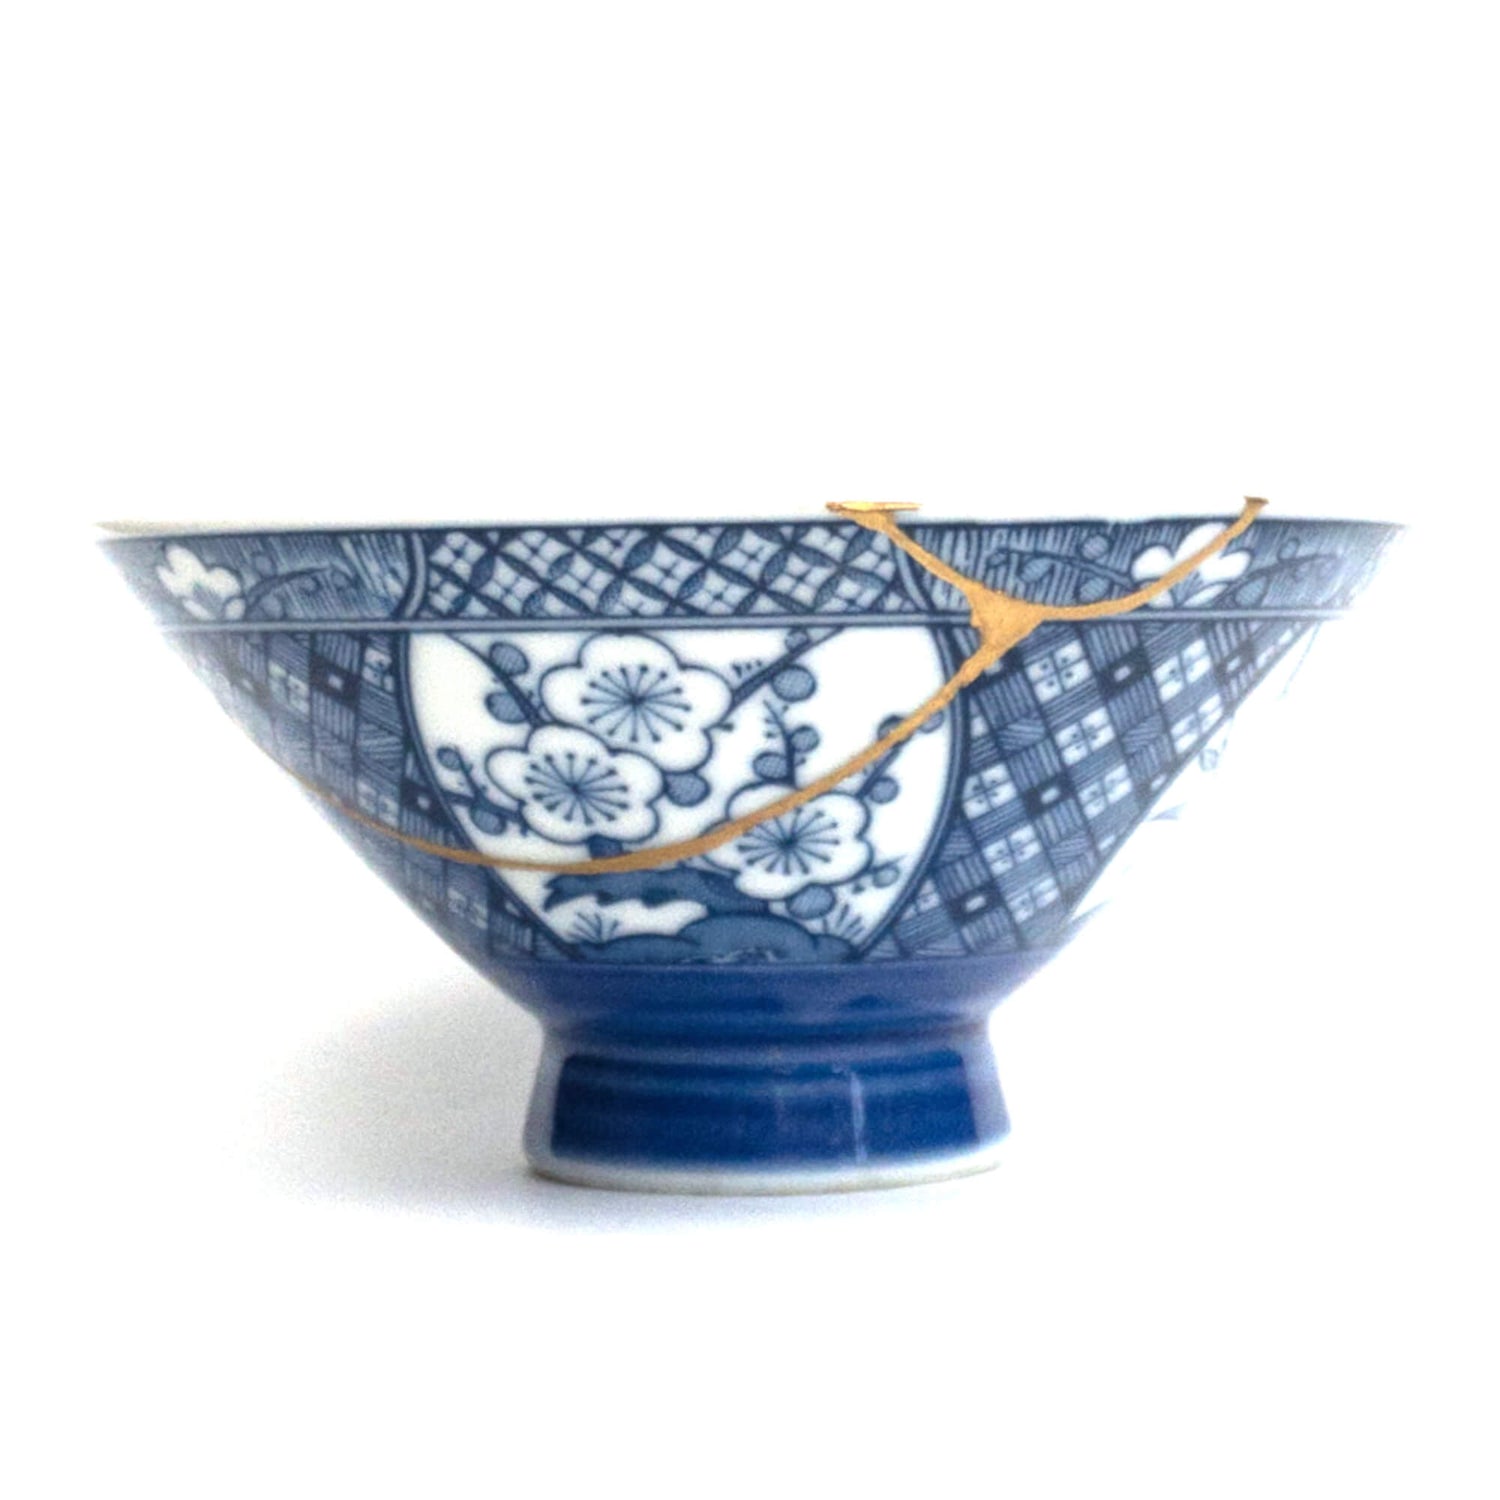 Kintsugi bowl, Japanese pottery repaired with gold